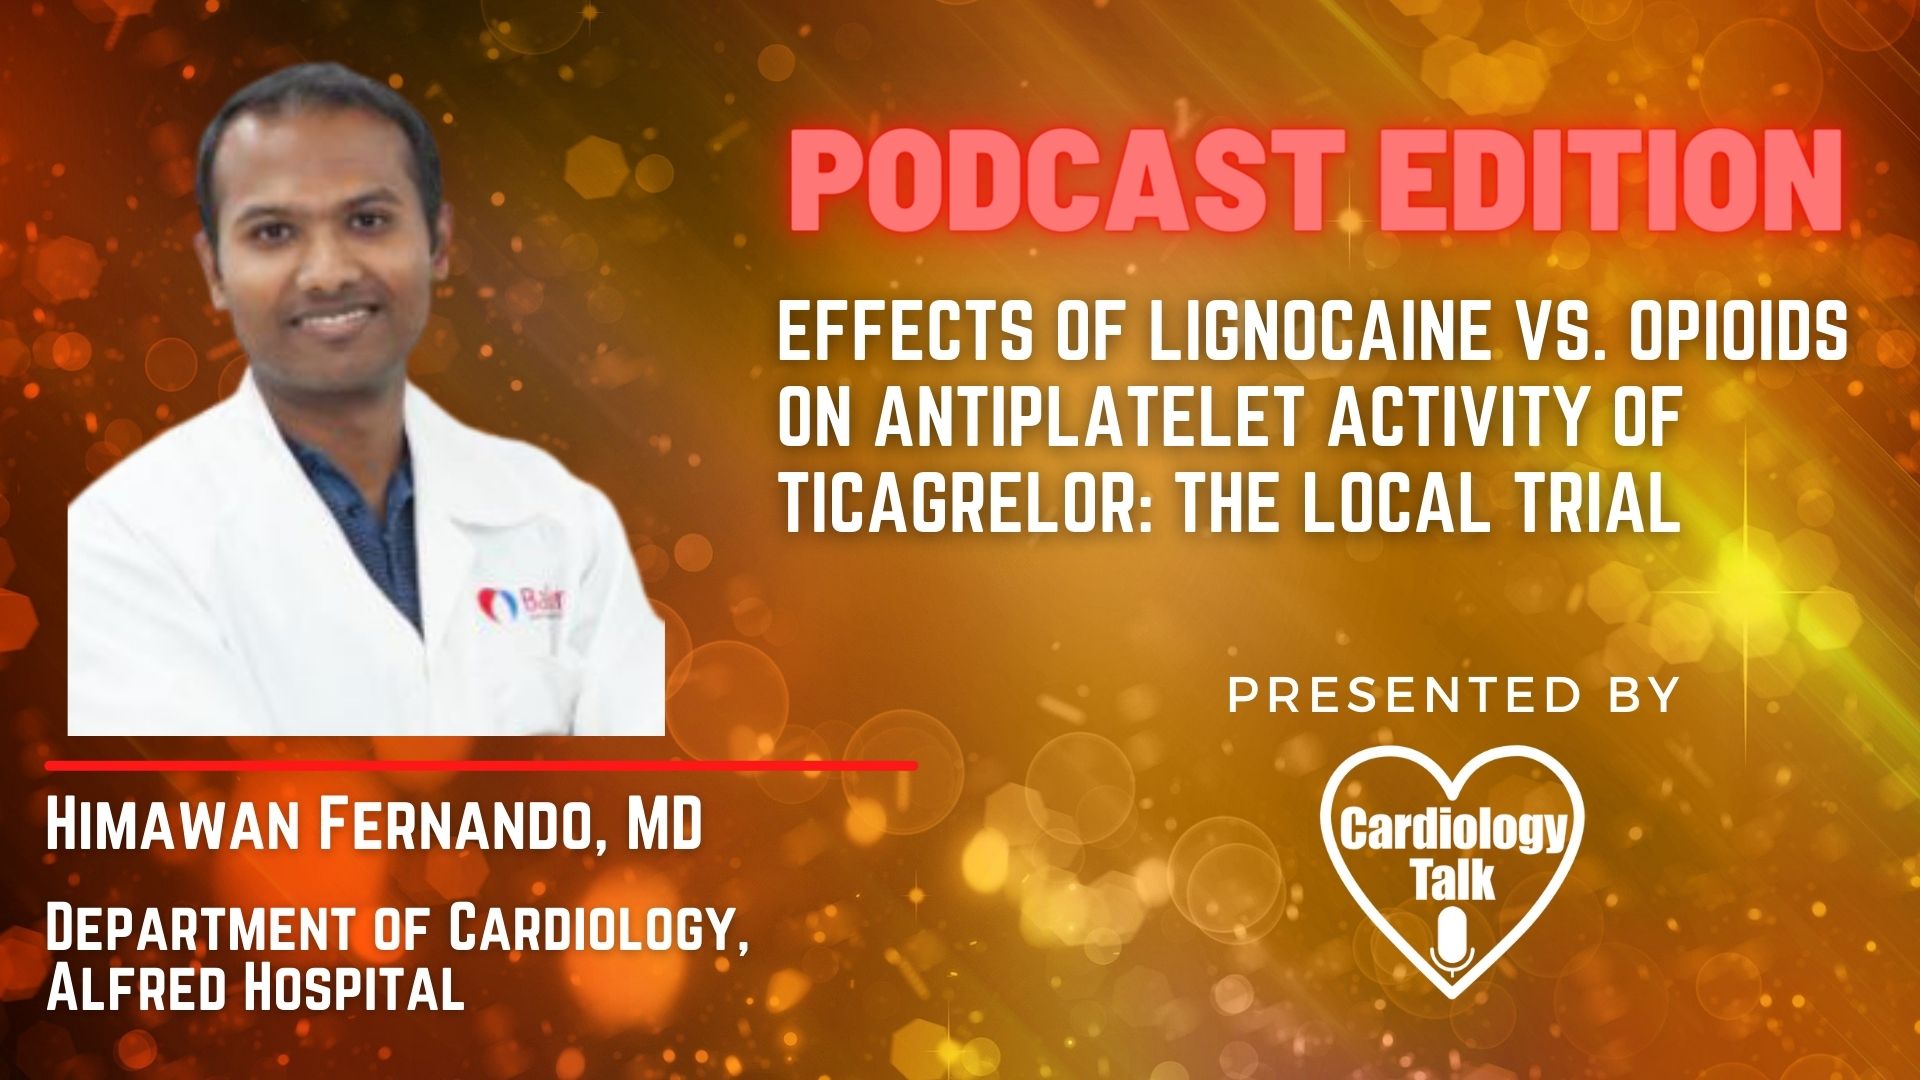 Podcast- Himawan Fernando MD -Effects of lignocaine vs. opioids on antiplatelet activity of ticagrelor: the LOCAL trial  #TheAlfredHospital #TheLocalTrial #Cardiology #Research